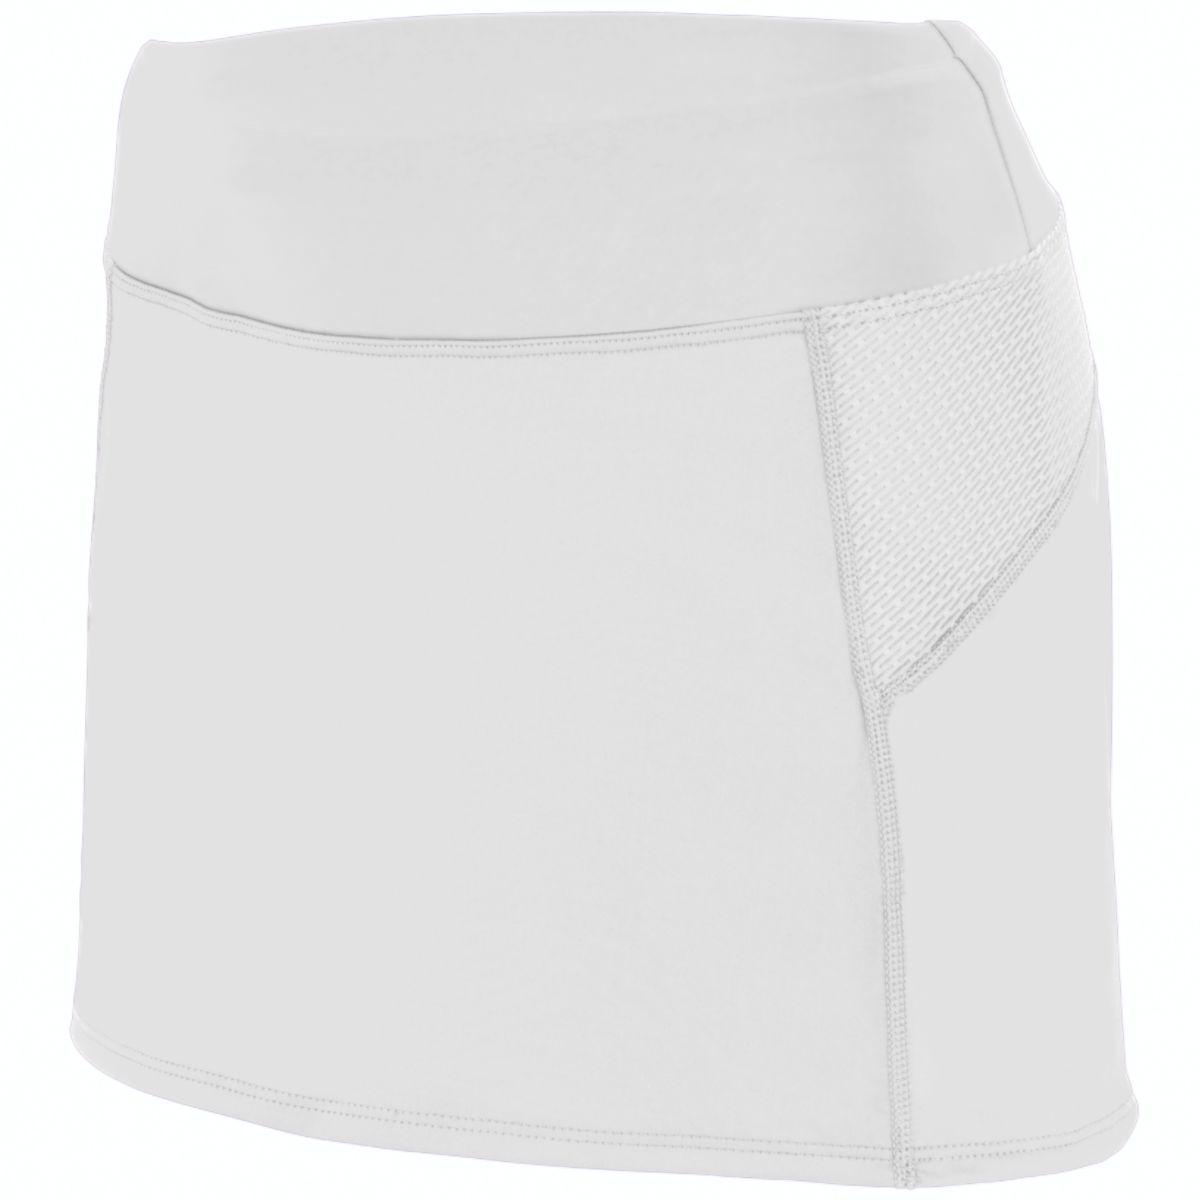 Augusta Sportswear Ladies Femfit Skort in White/Graphite  -Part of the Ladies, Augusta-Products product lines at KanaleyCreations.com